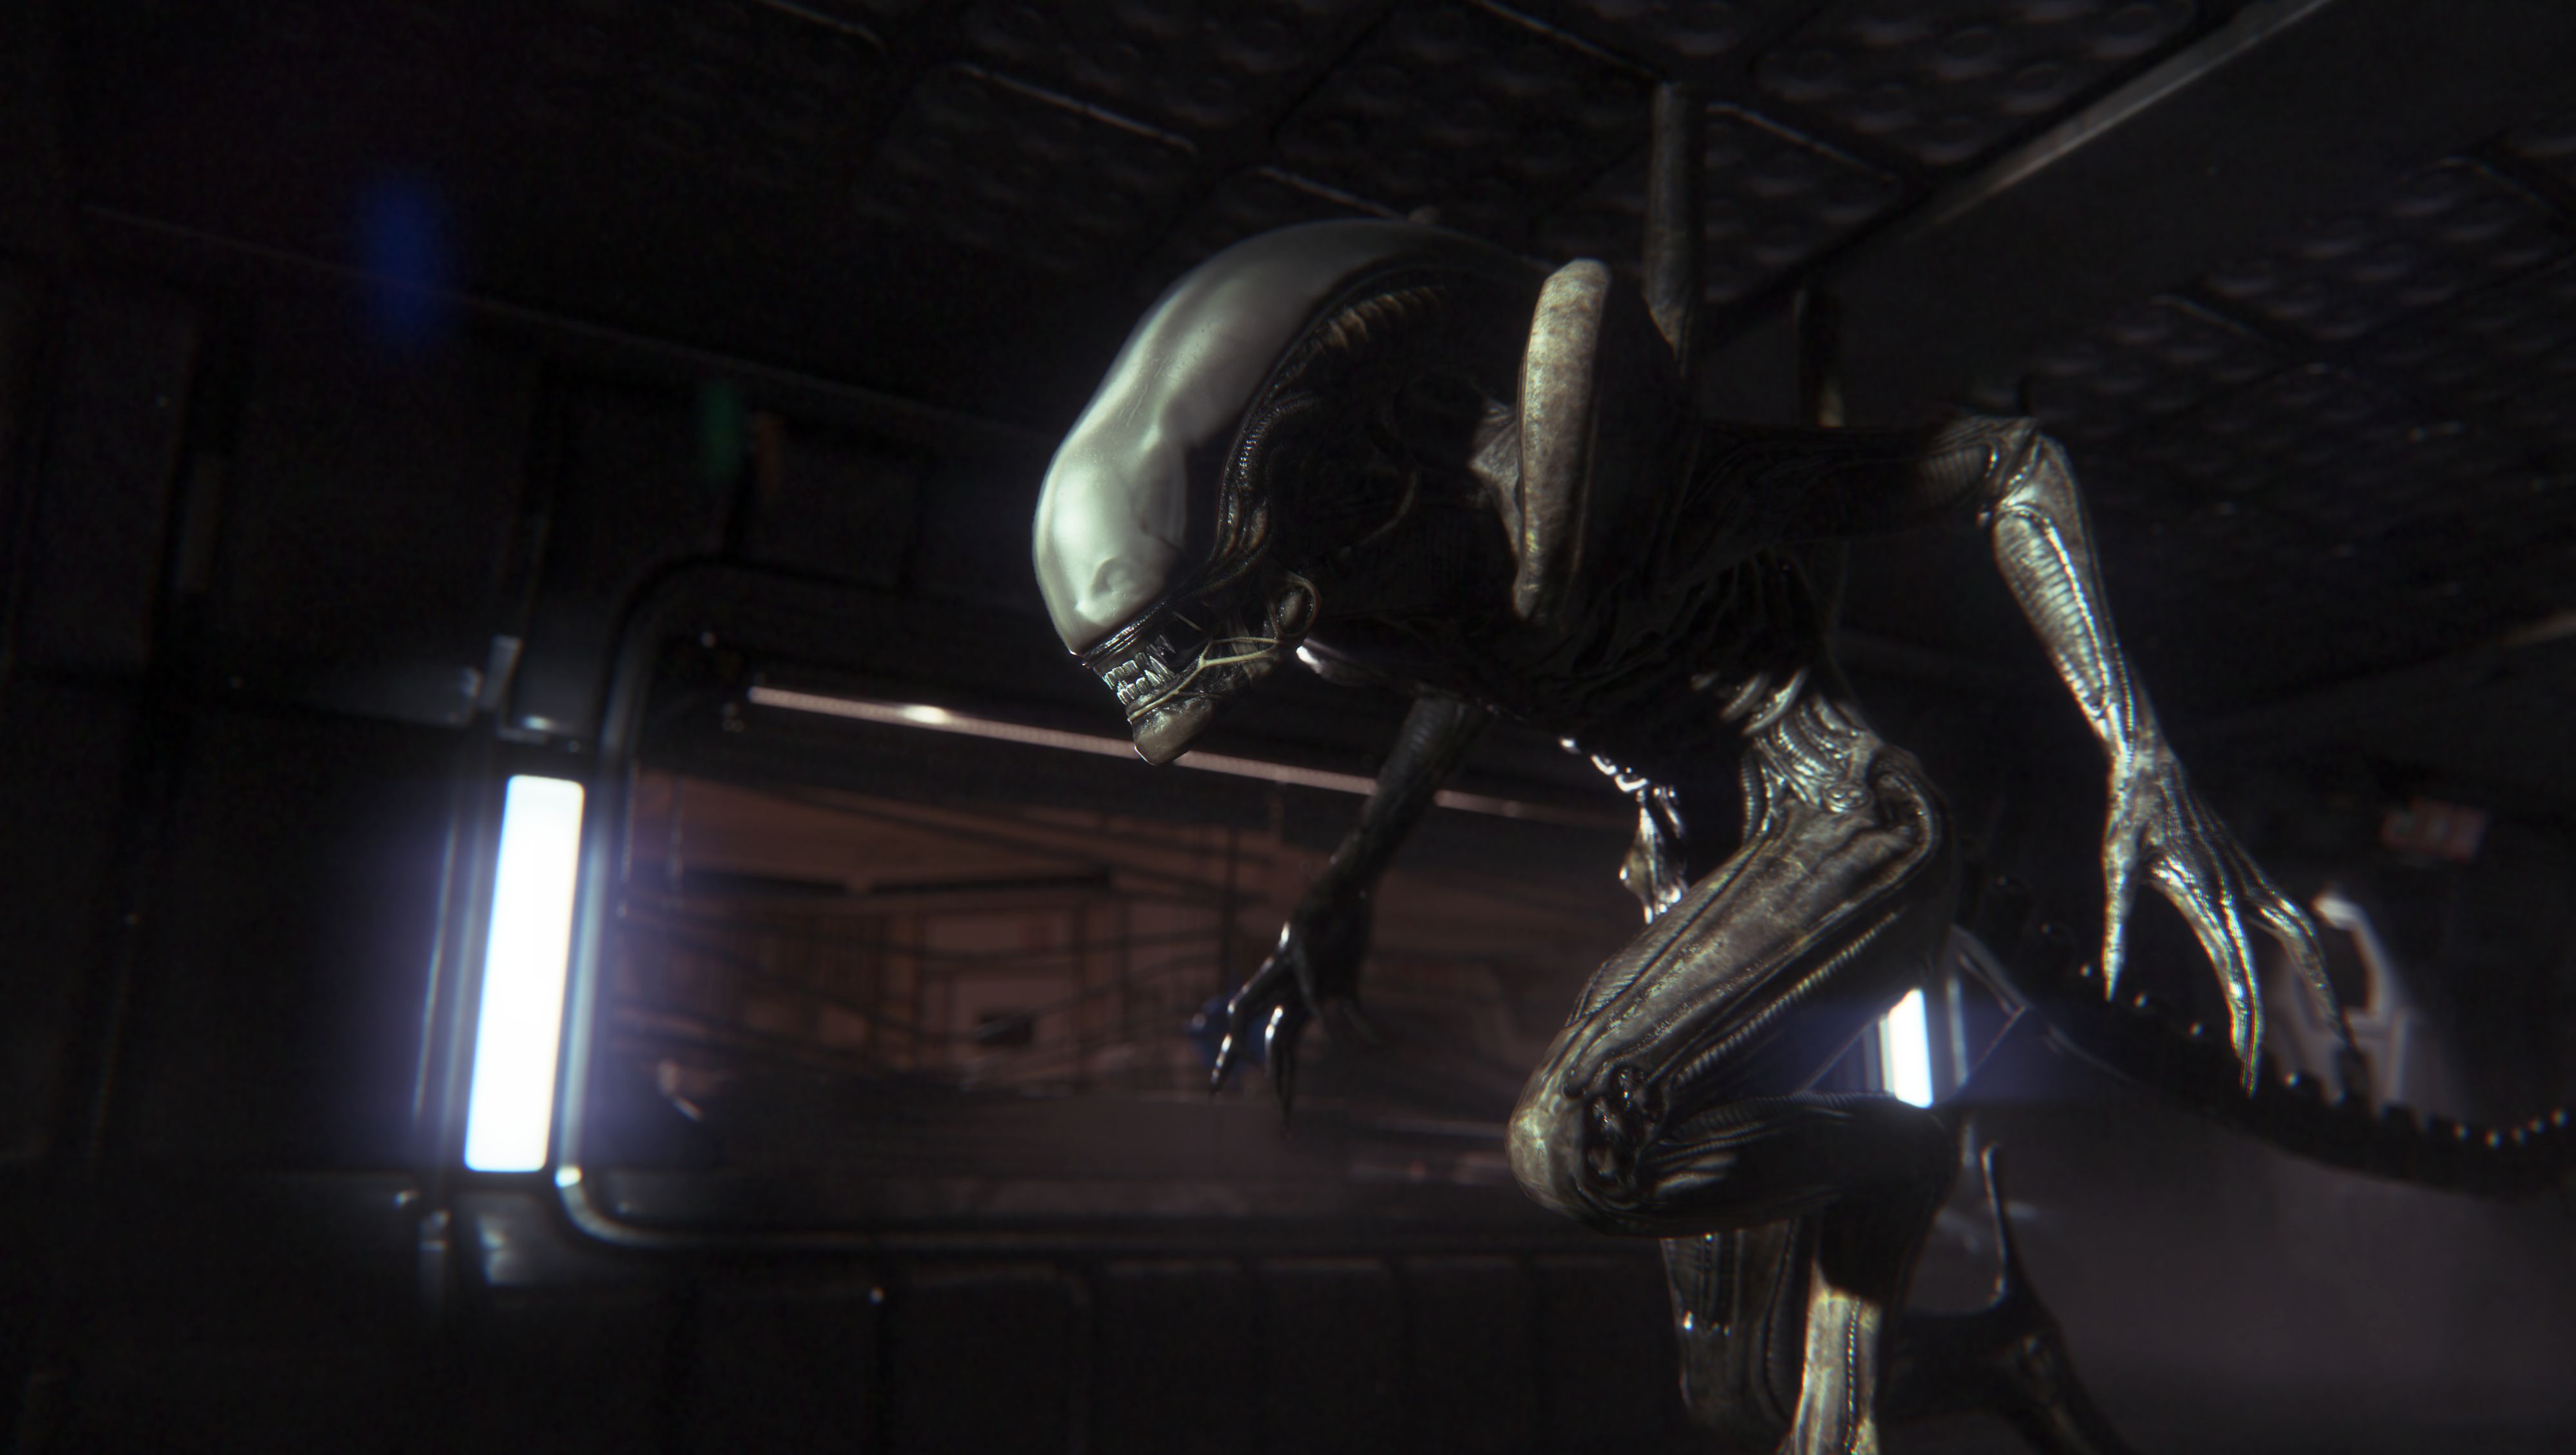 loco Integral nicotina Alien: Isolation Is Still An Unmatched Horror Experience - GameSpot